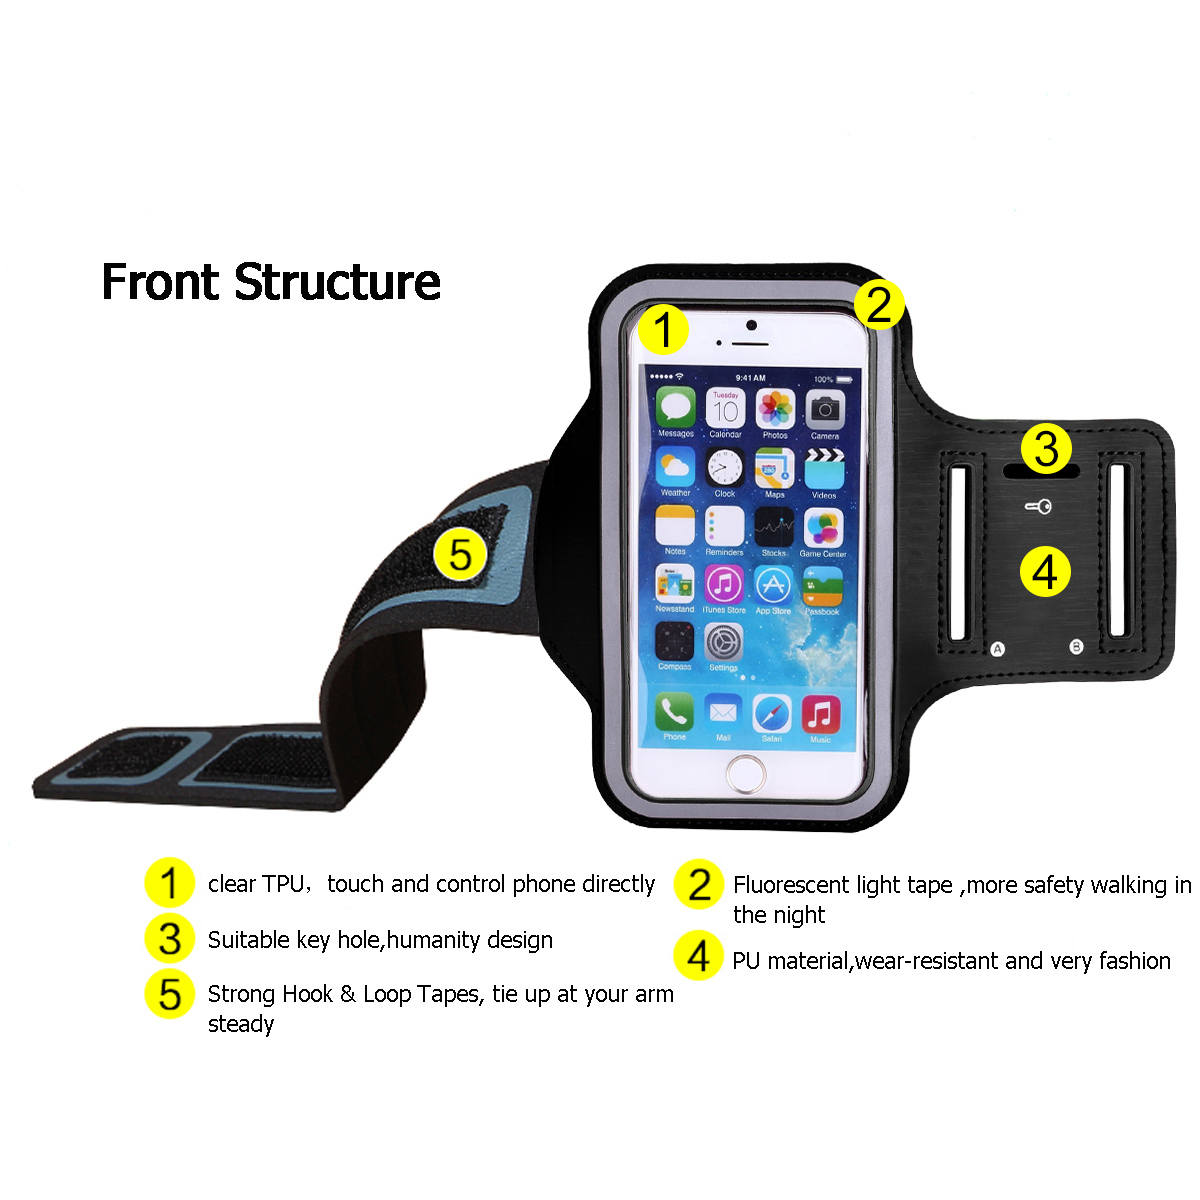 Universal-Sports-Elastic-Armband-Sweatproof-Touch-Screen-Mobile-Phone-Arm-Bags-with-Earphone-Port-fo-1890485-3